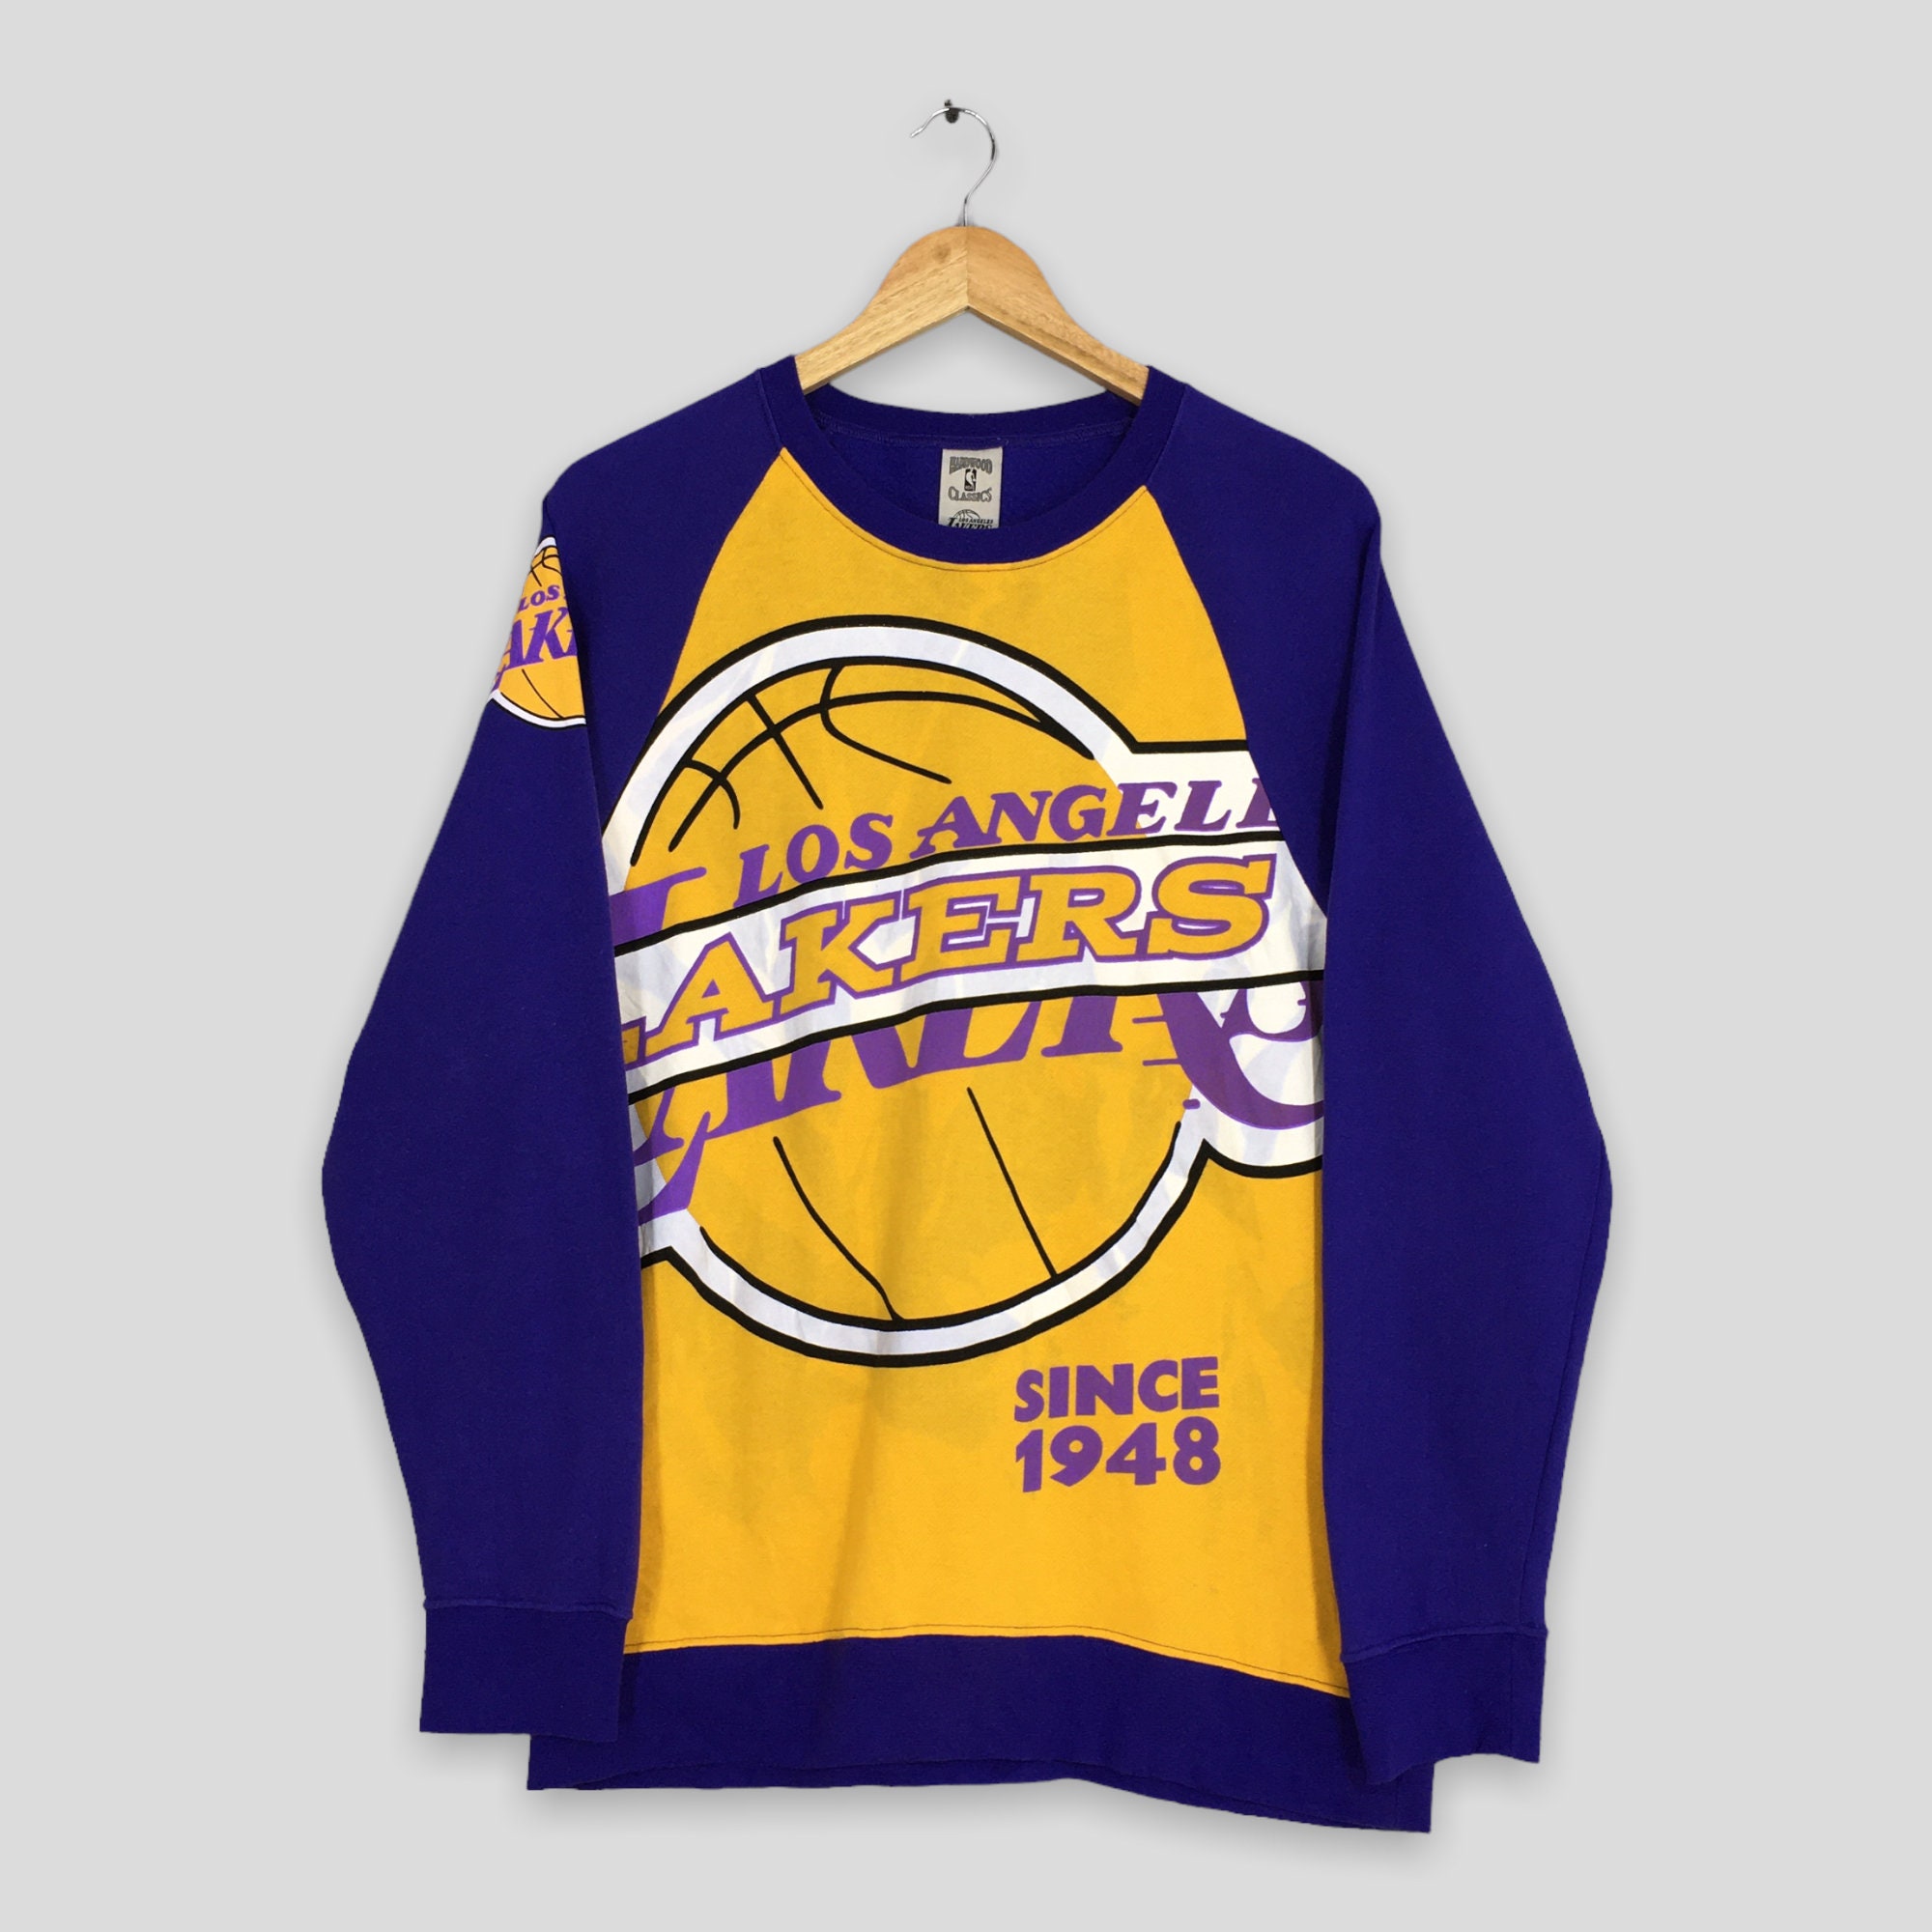 NBA Vintage Black Lightning Lakers Hoodie S / BMPHJT20002 by Mitchell & Ness